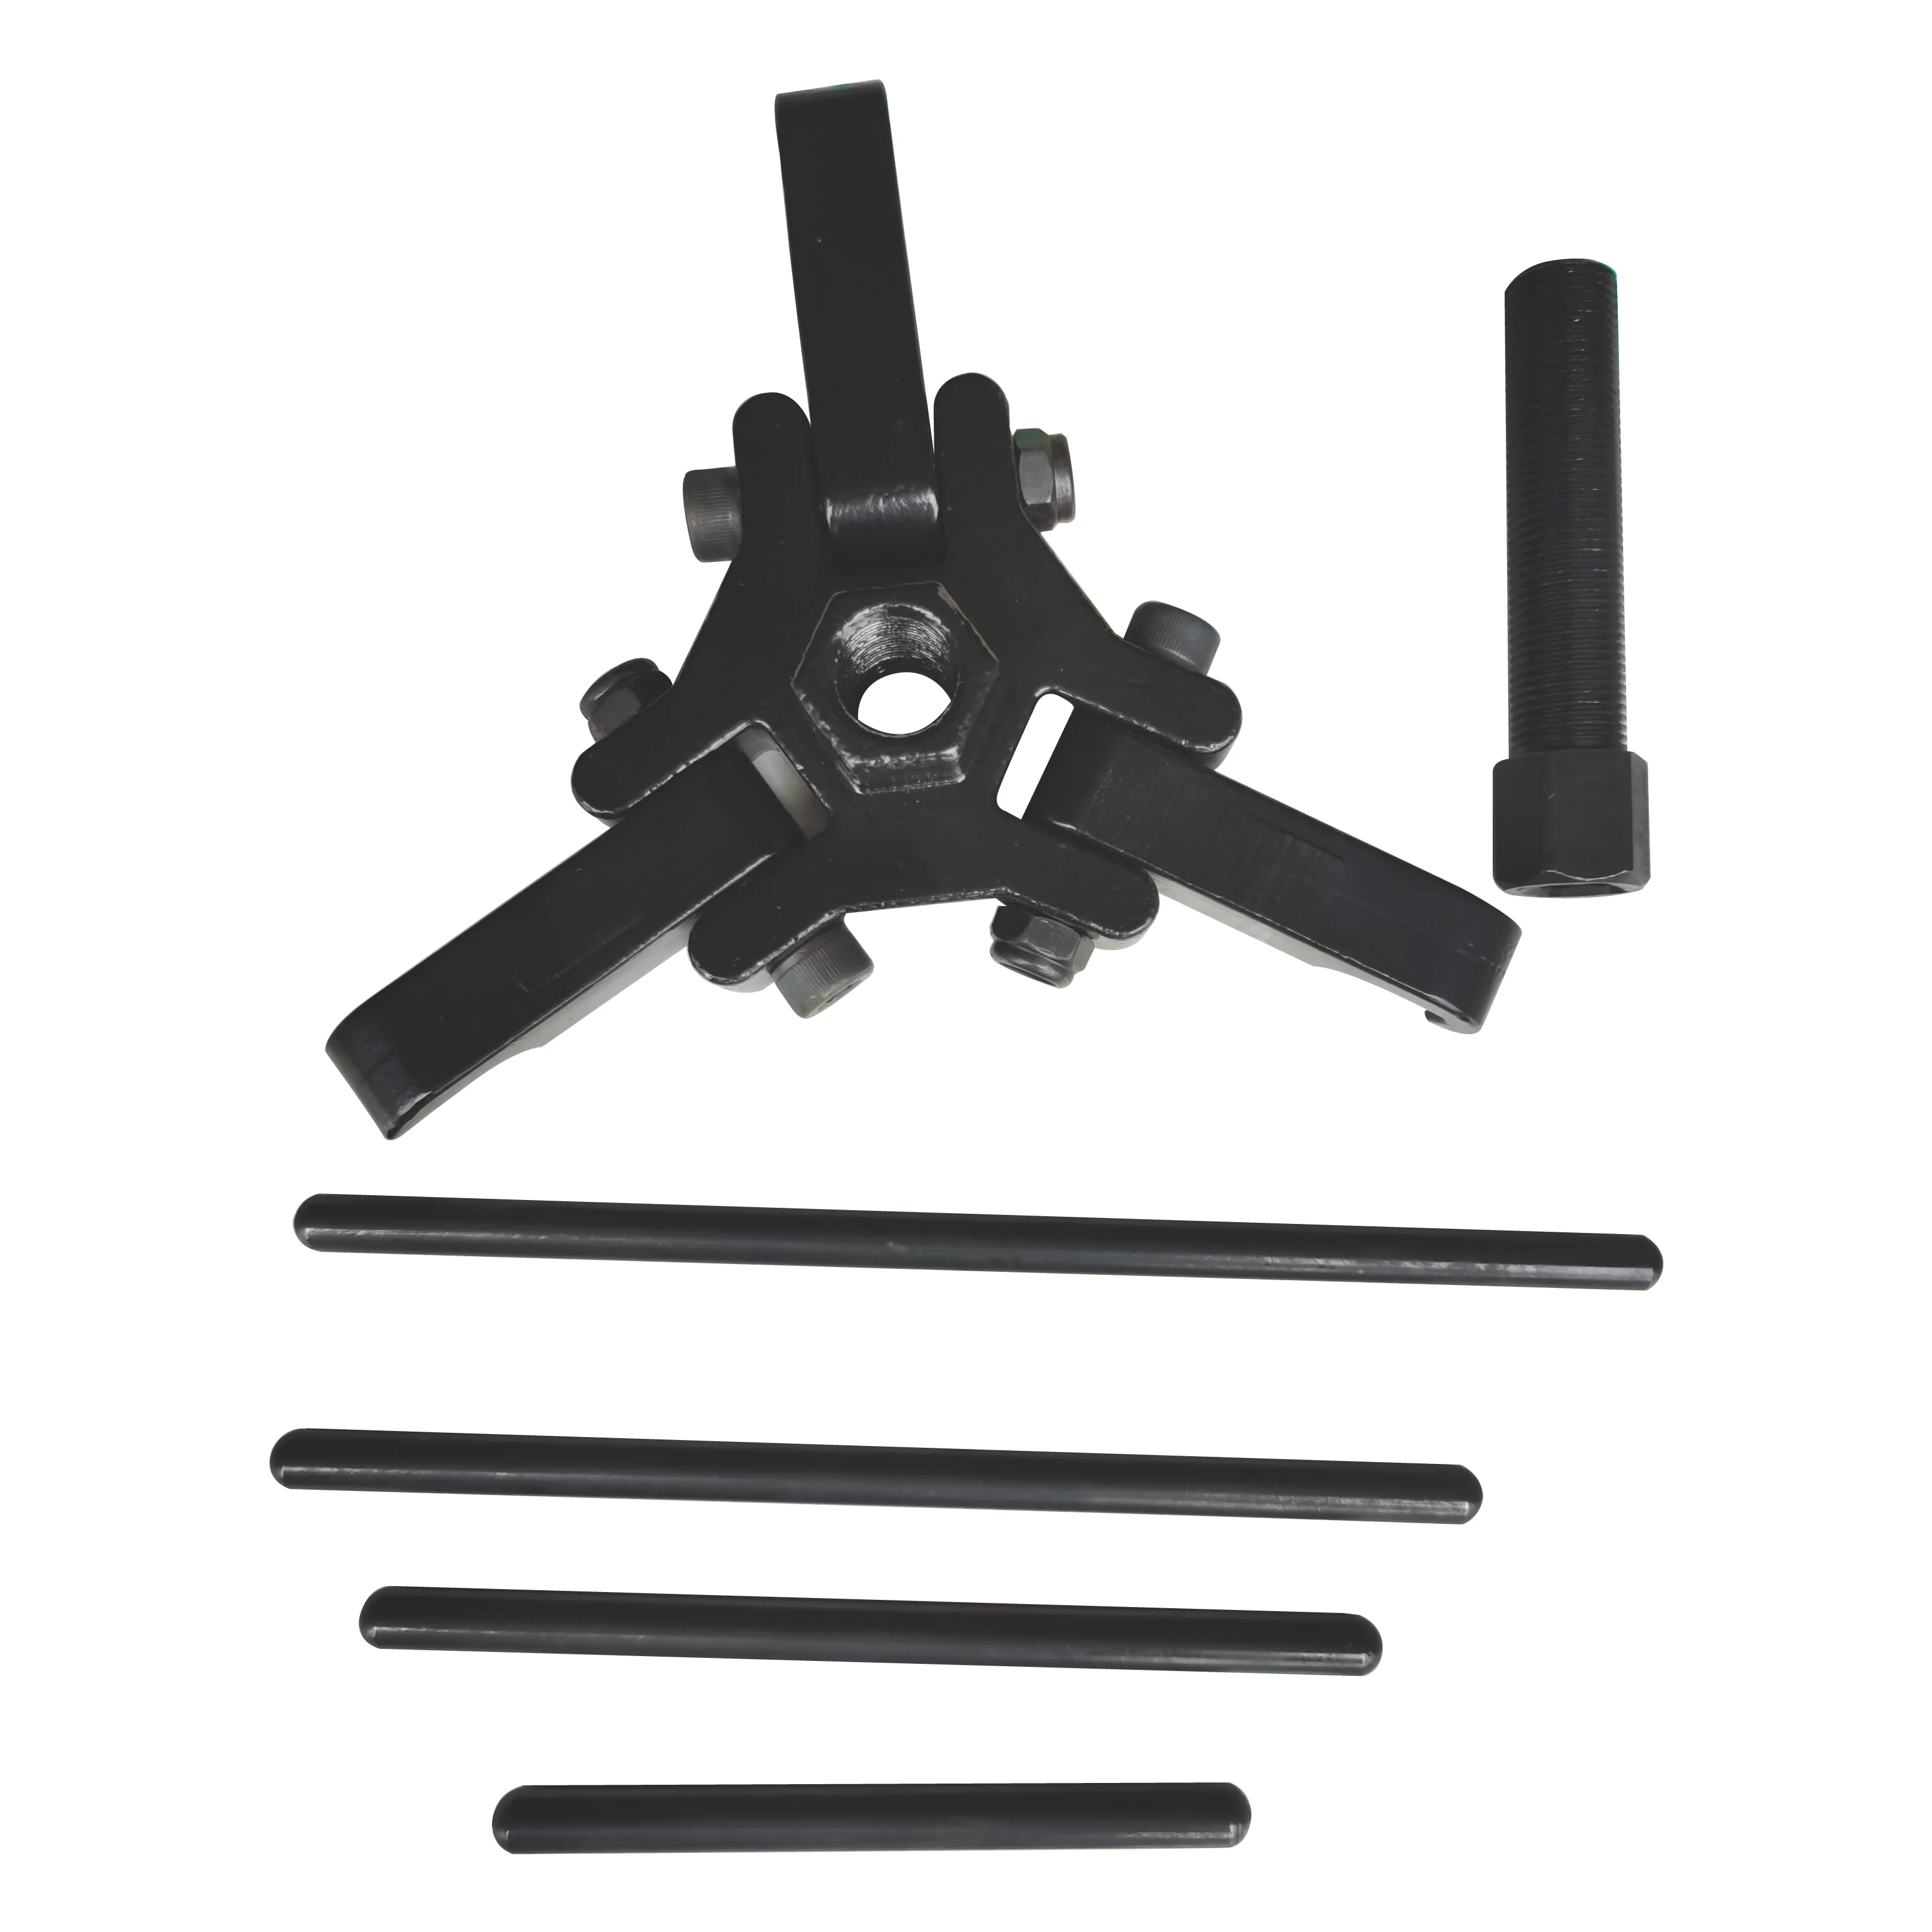 Harmonic Balancer Damper Puller Kit 3-Jaw Puller Fits Most Late Model Automobiles 4 Forcing Rods